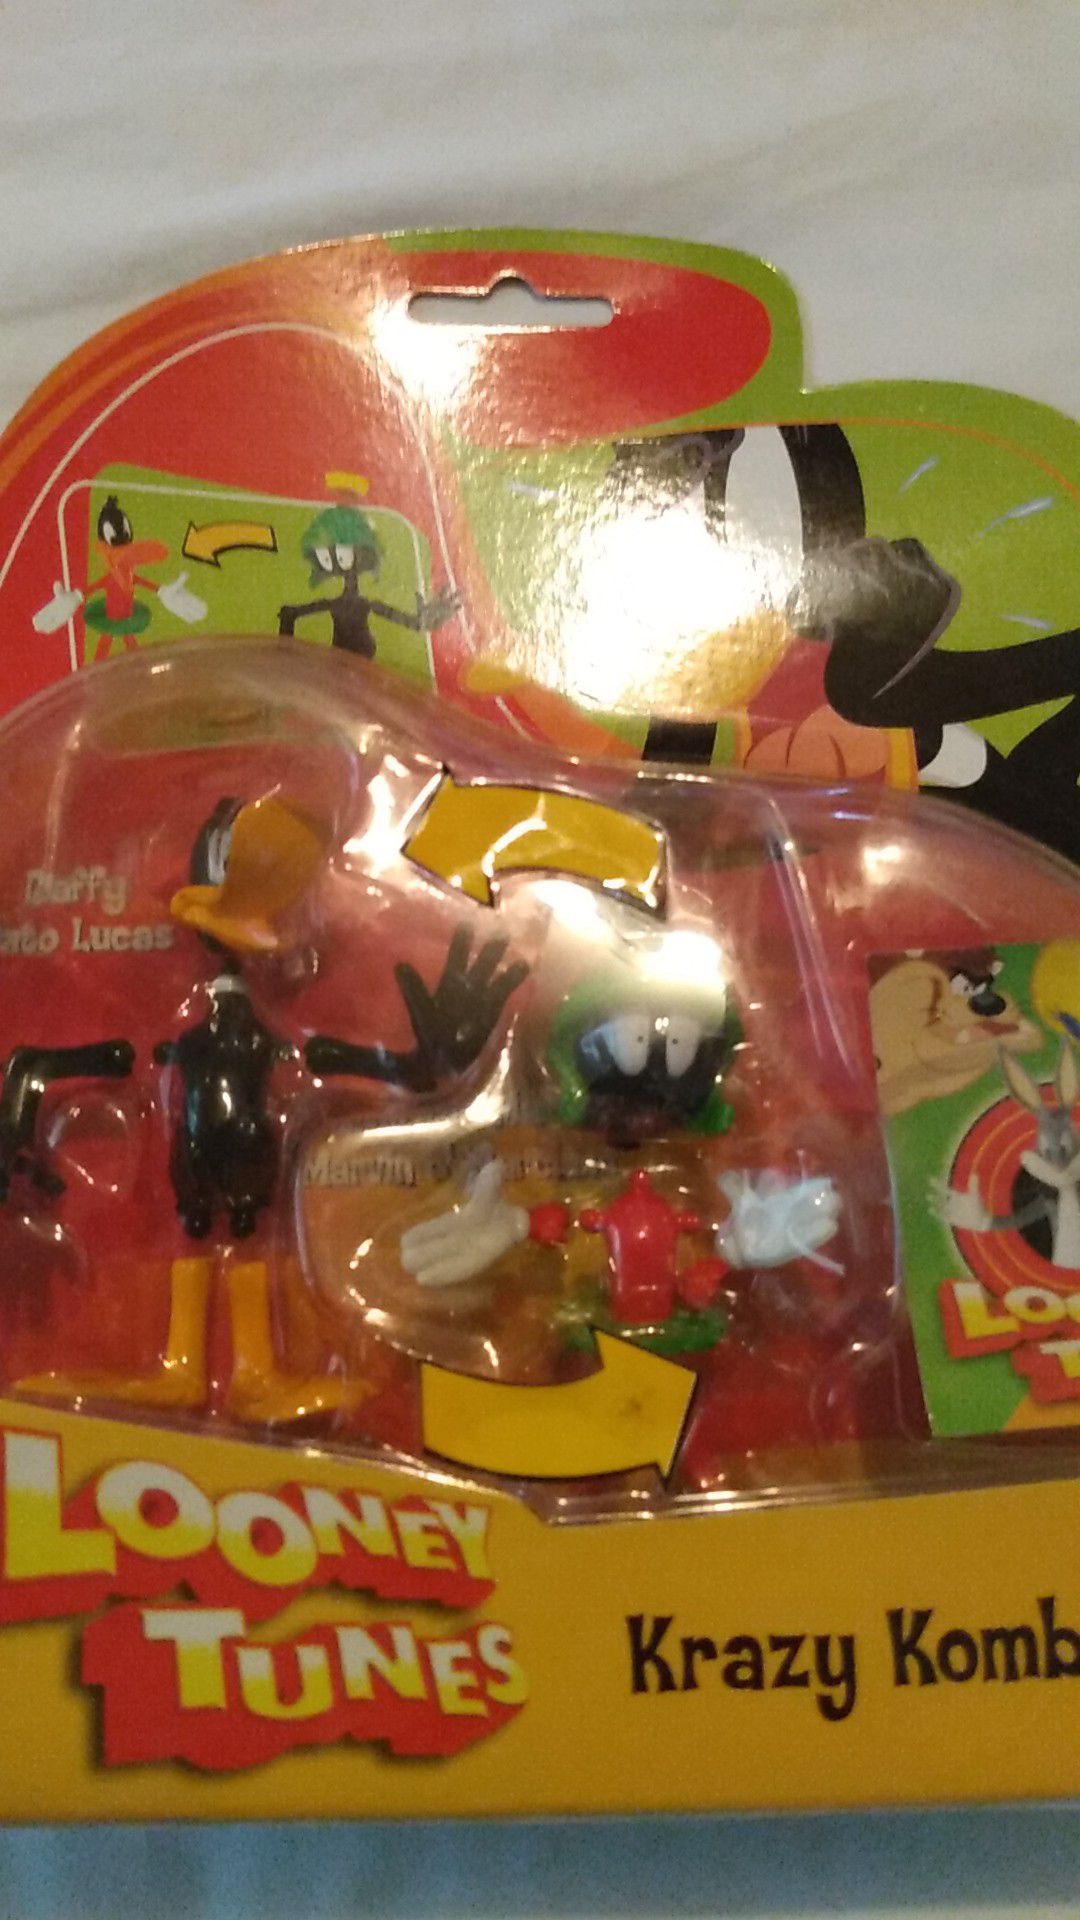 Vintage Looney tunes toys collectible